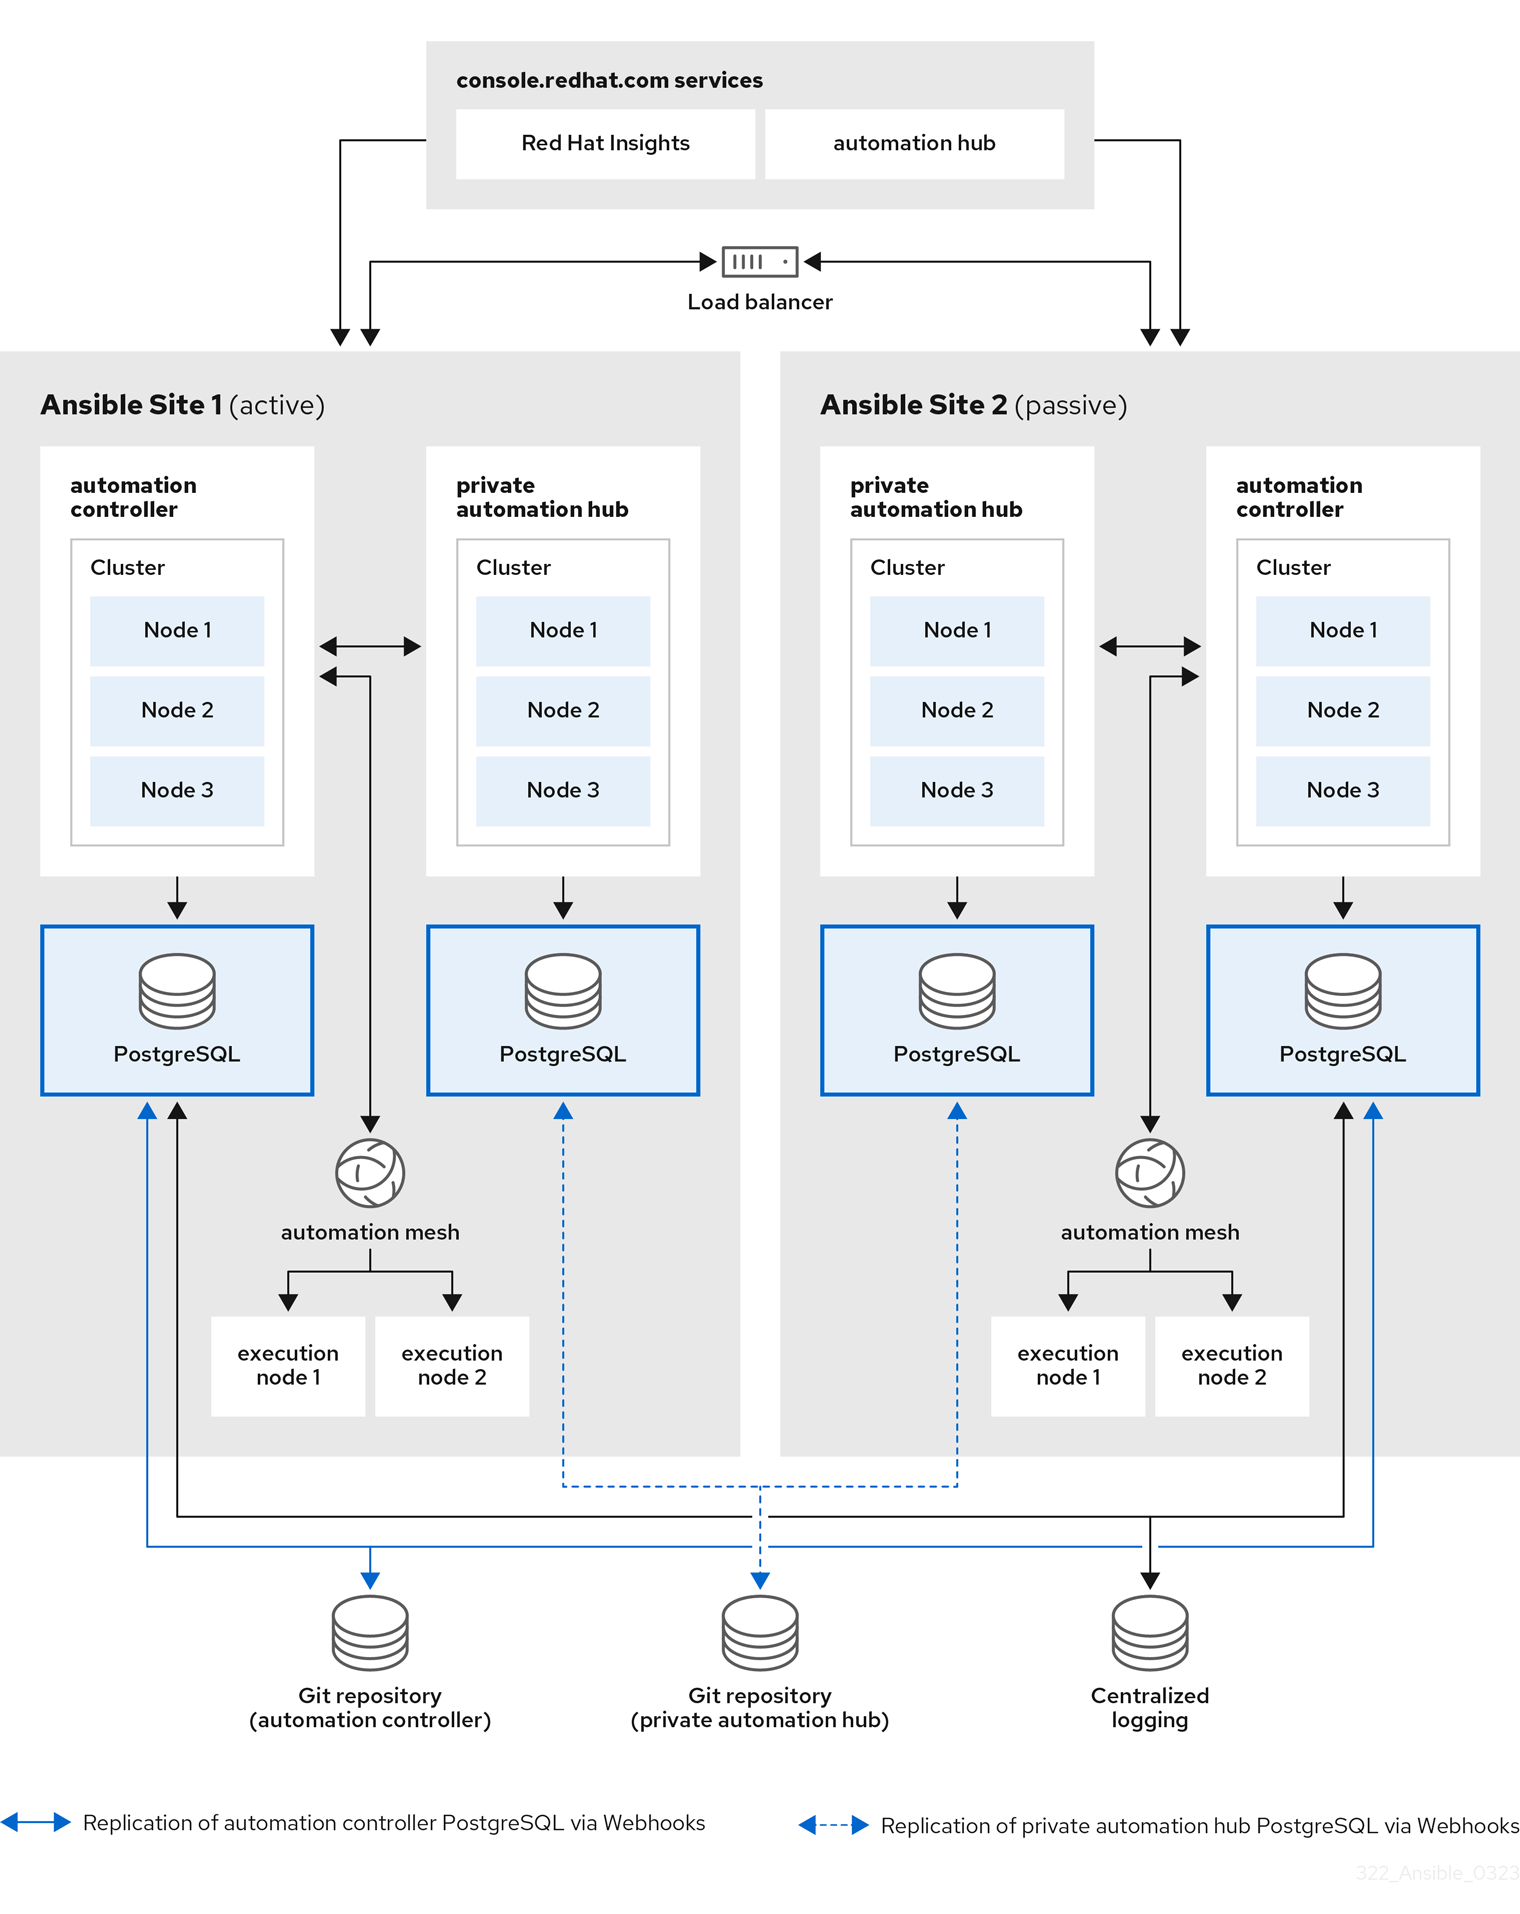 Reference architecture for an example setup of an Ansible Automation Platform deployment for large scale production environments